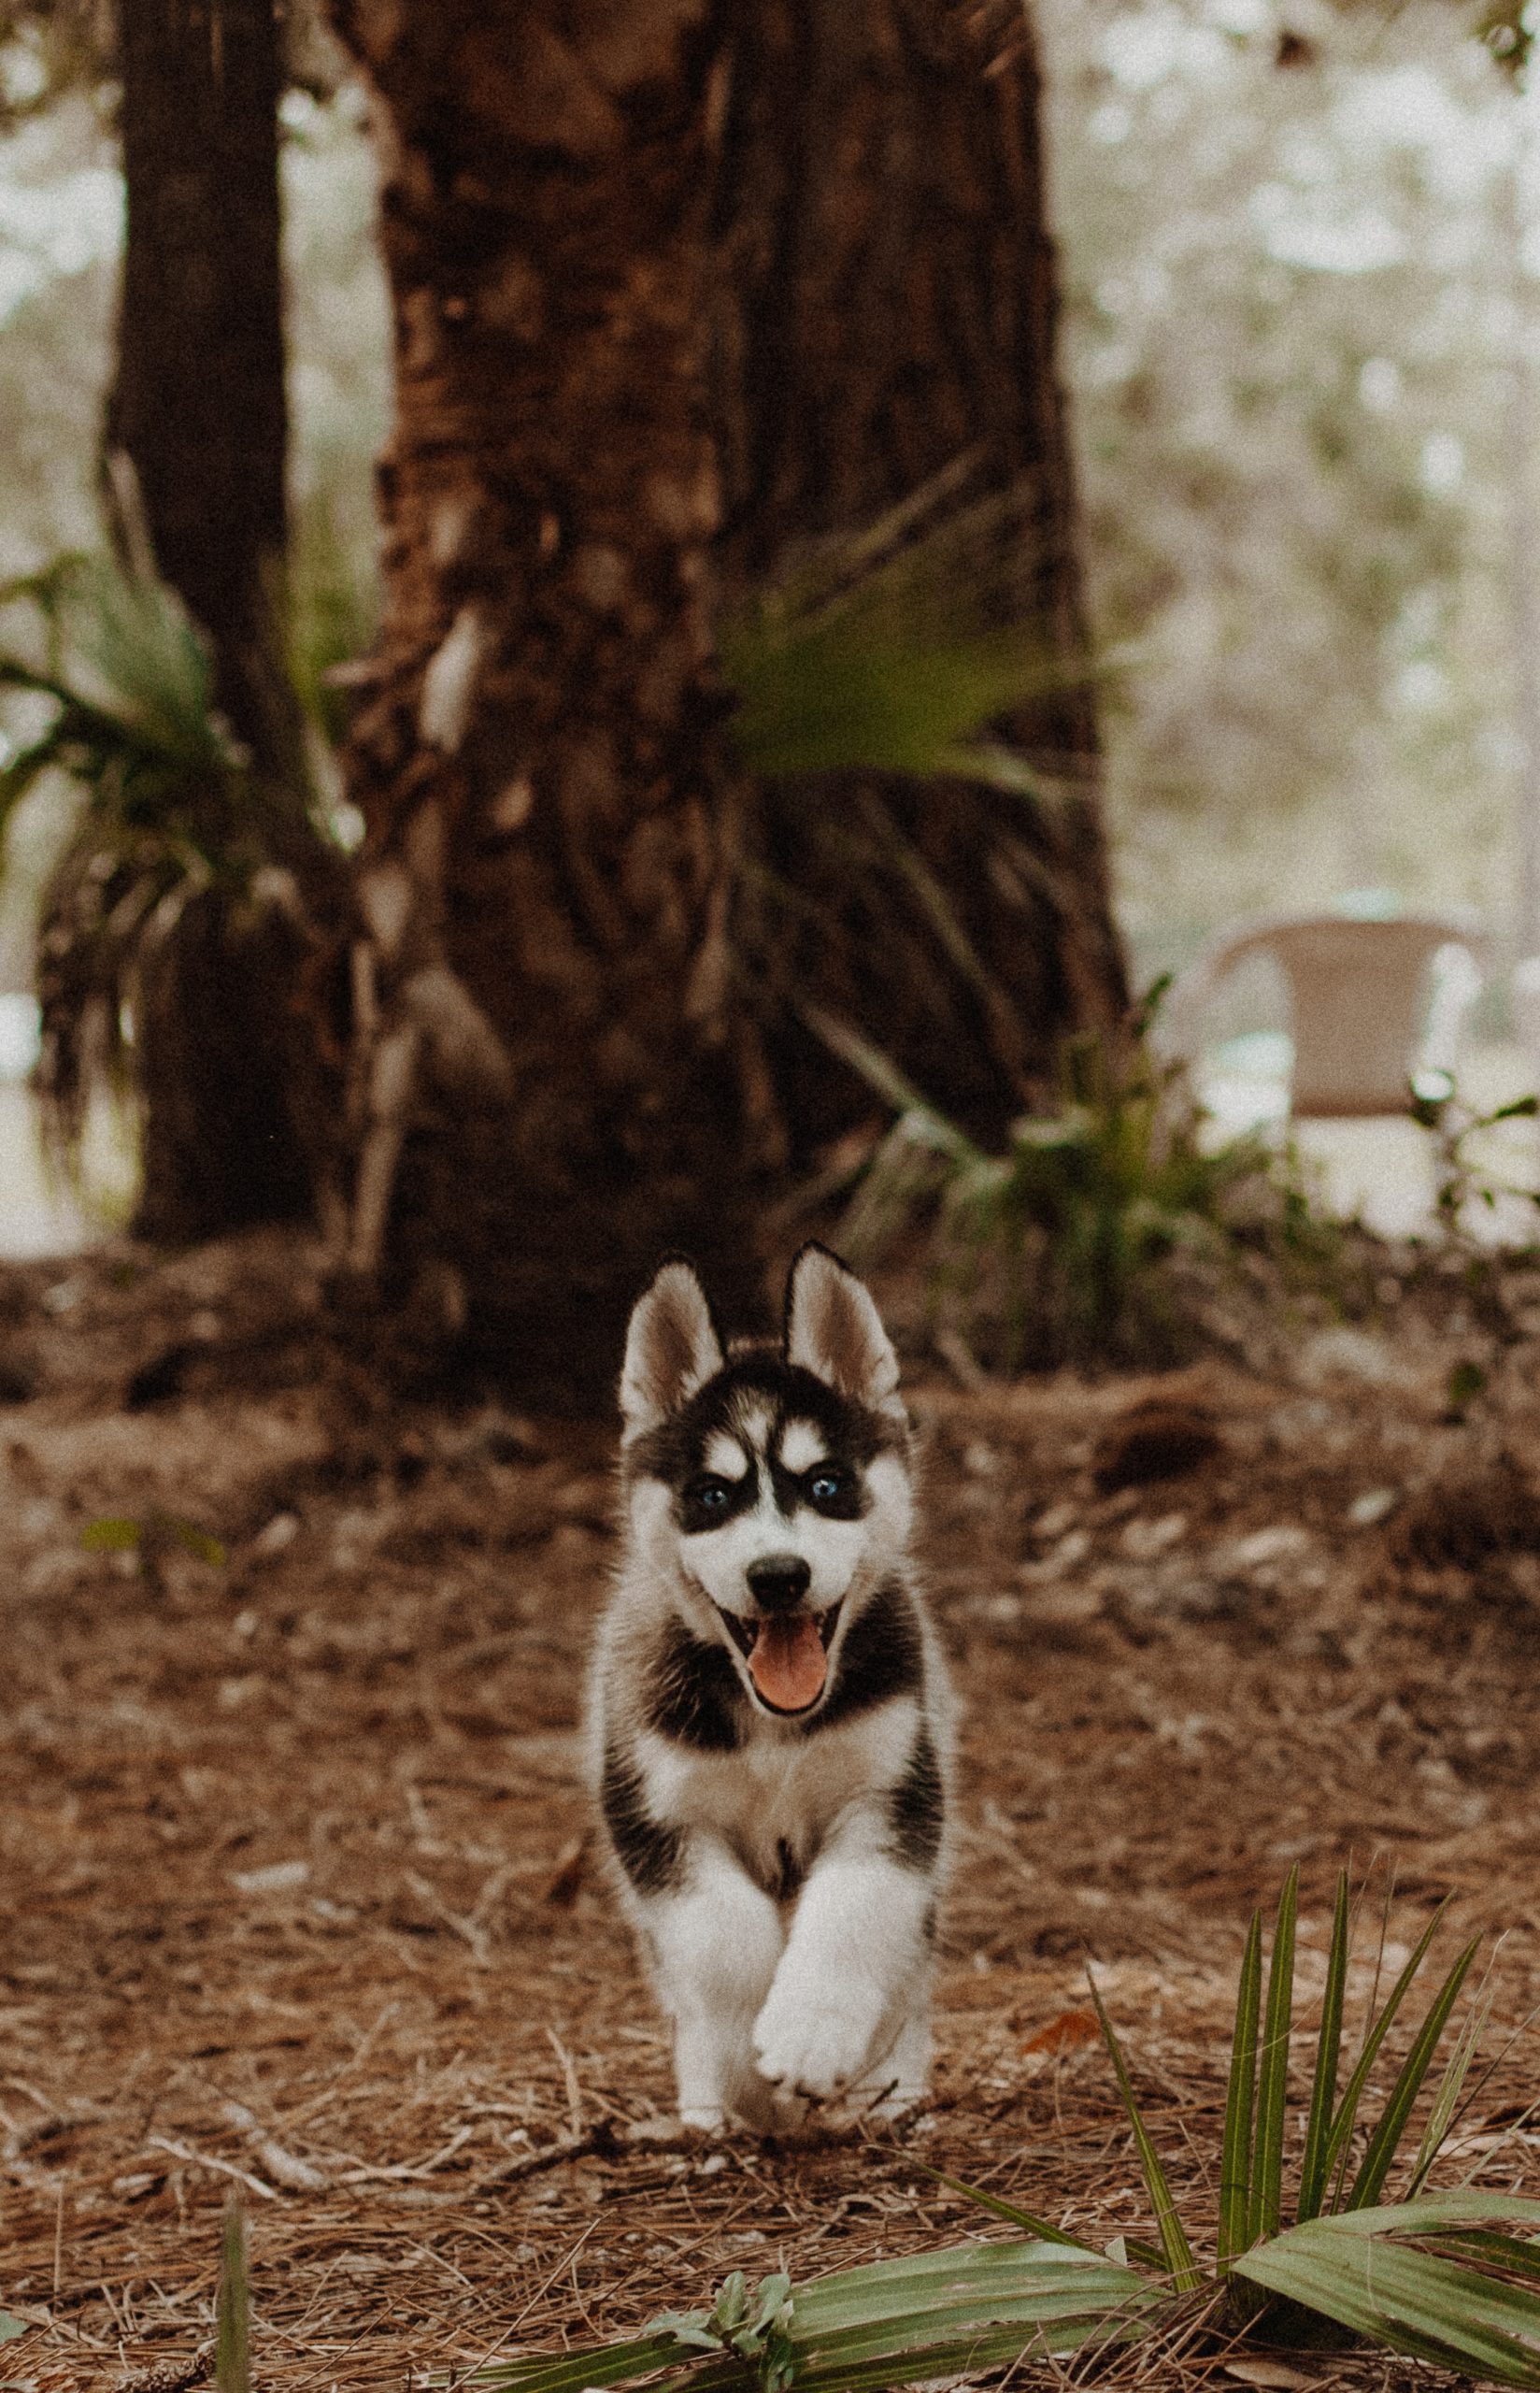 The Siberian Husky: A Fascinating History, Distinctive Traits, and Care Tips